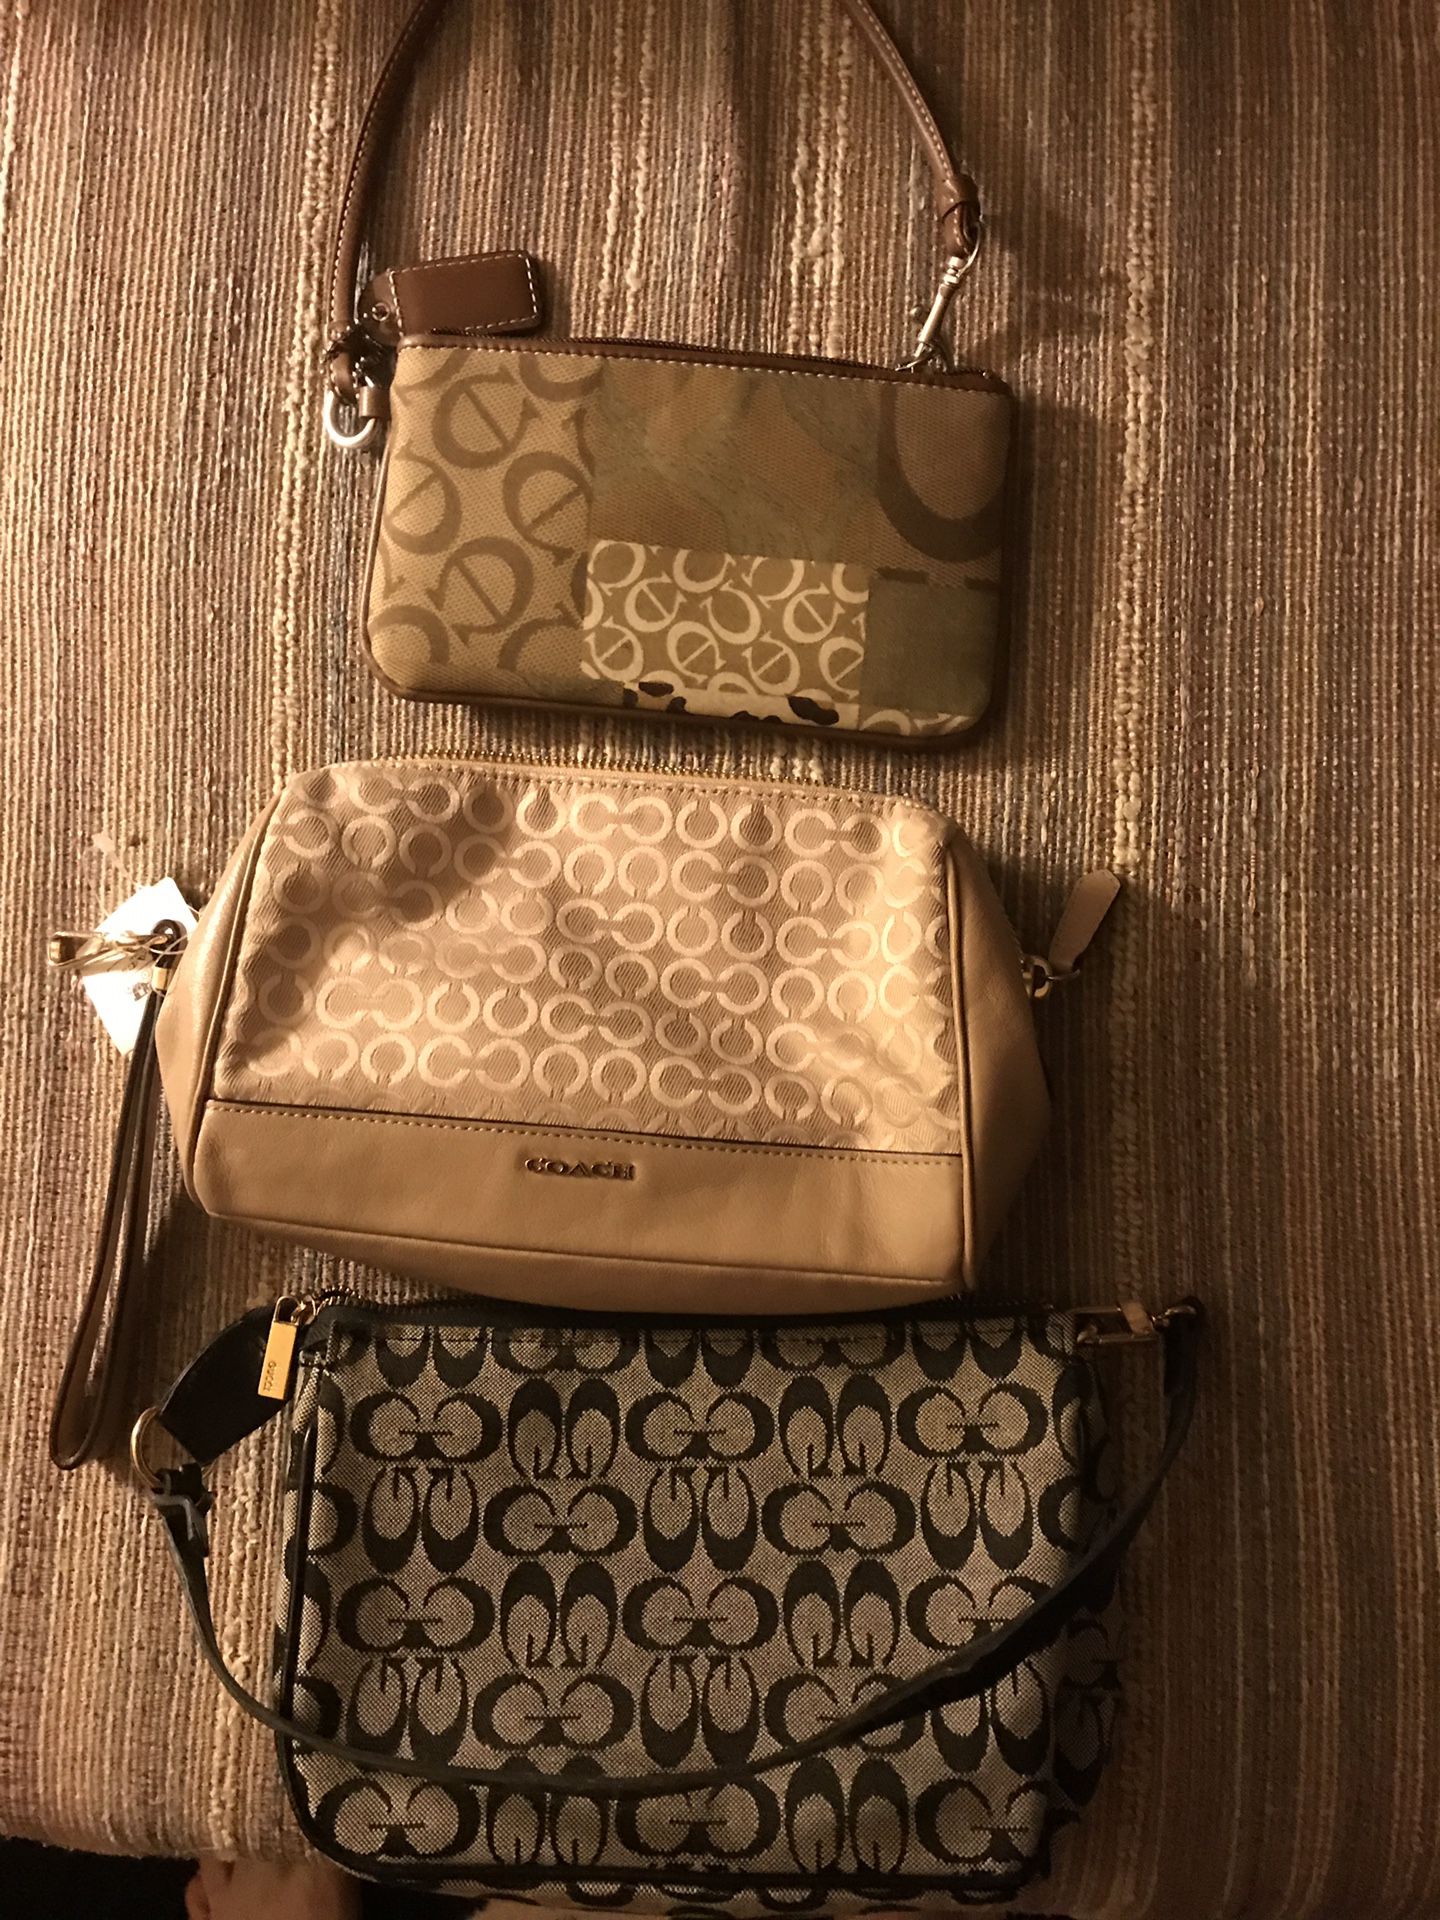 Three coach purse bags never used new